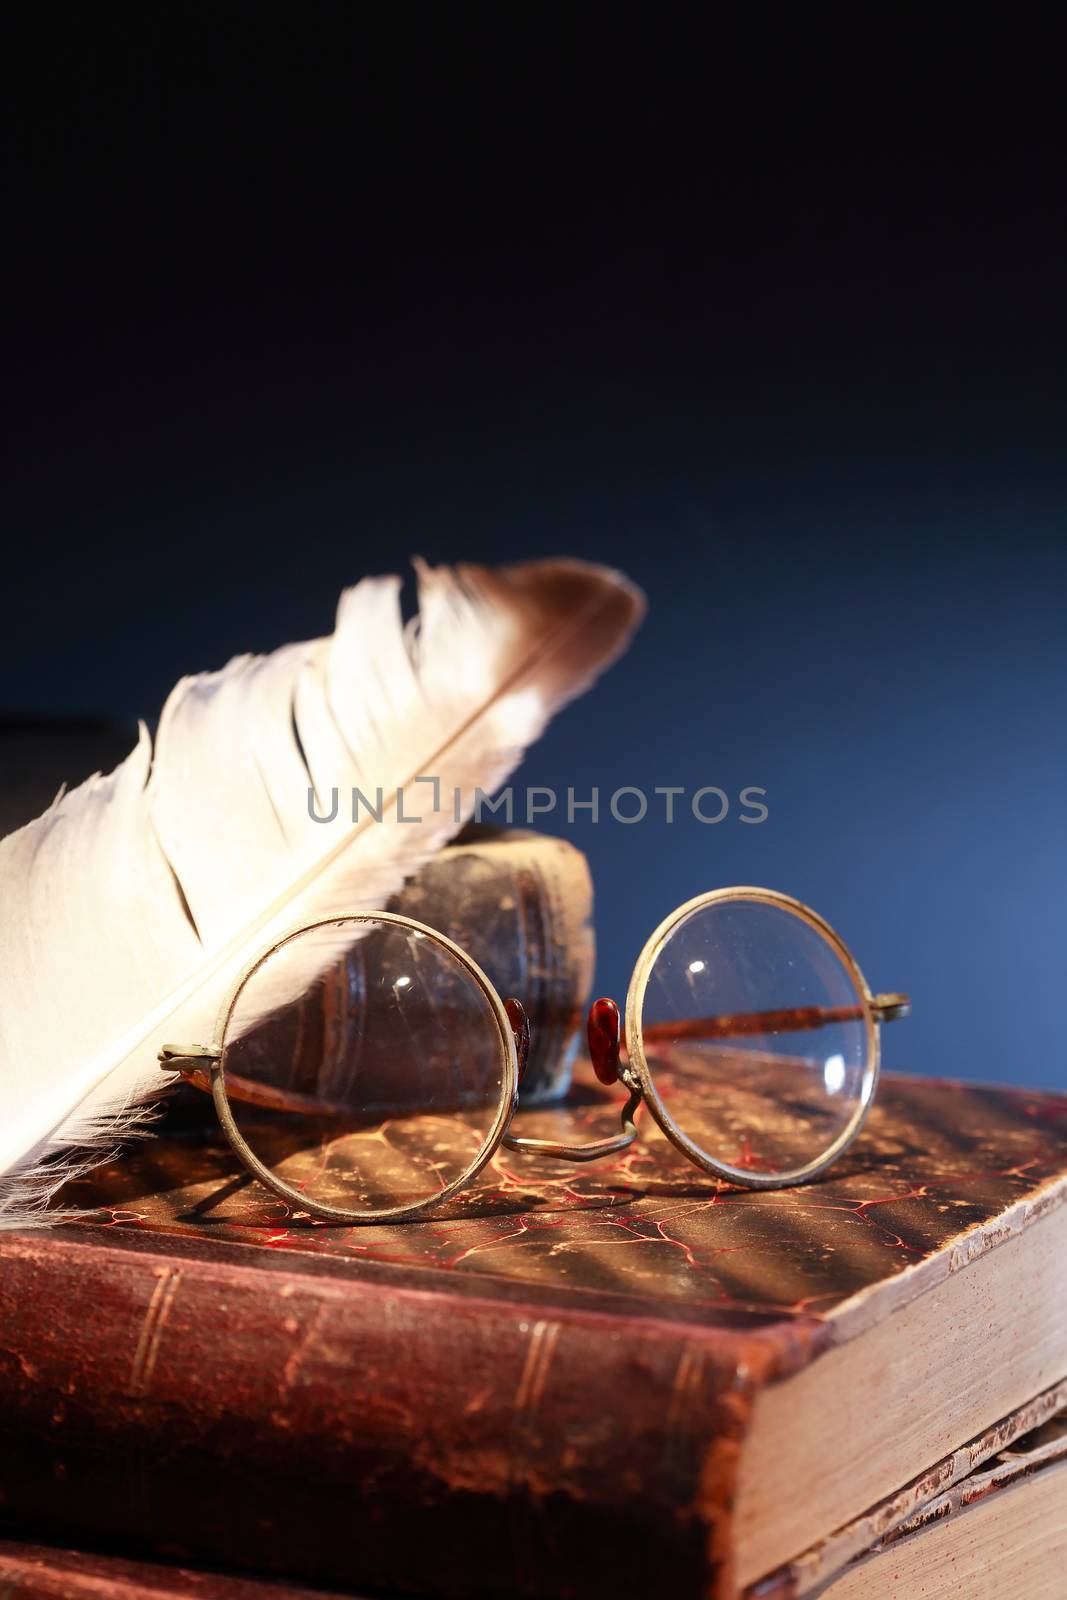 Vintage still life. Quill pen and spectacles on old books